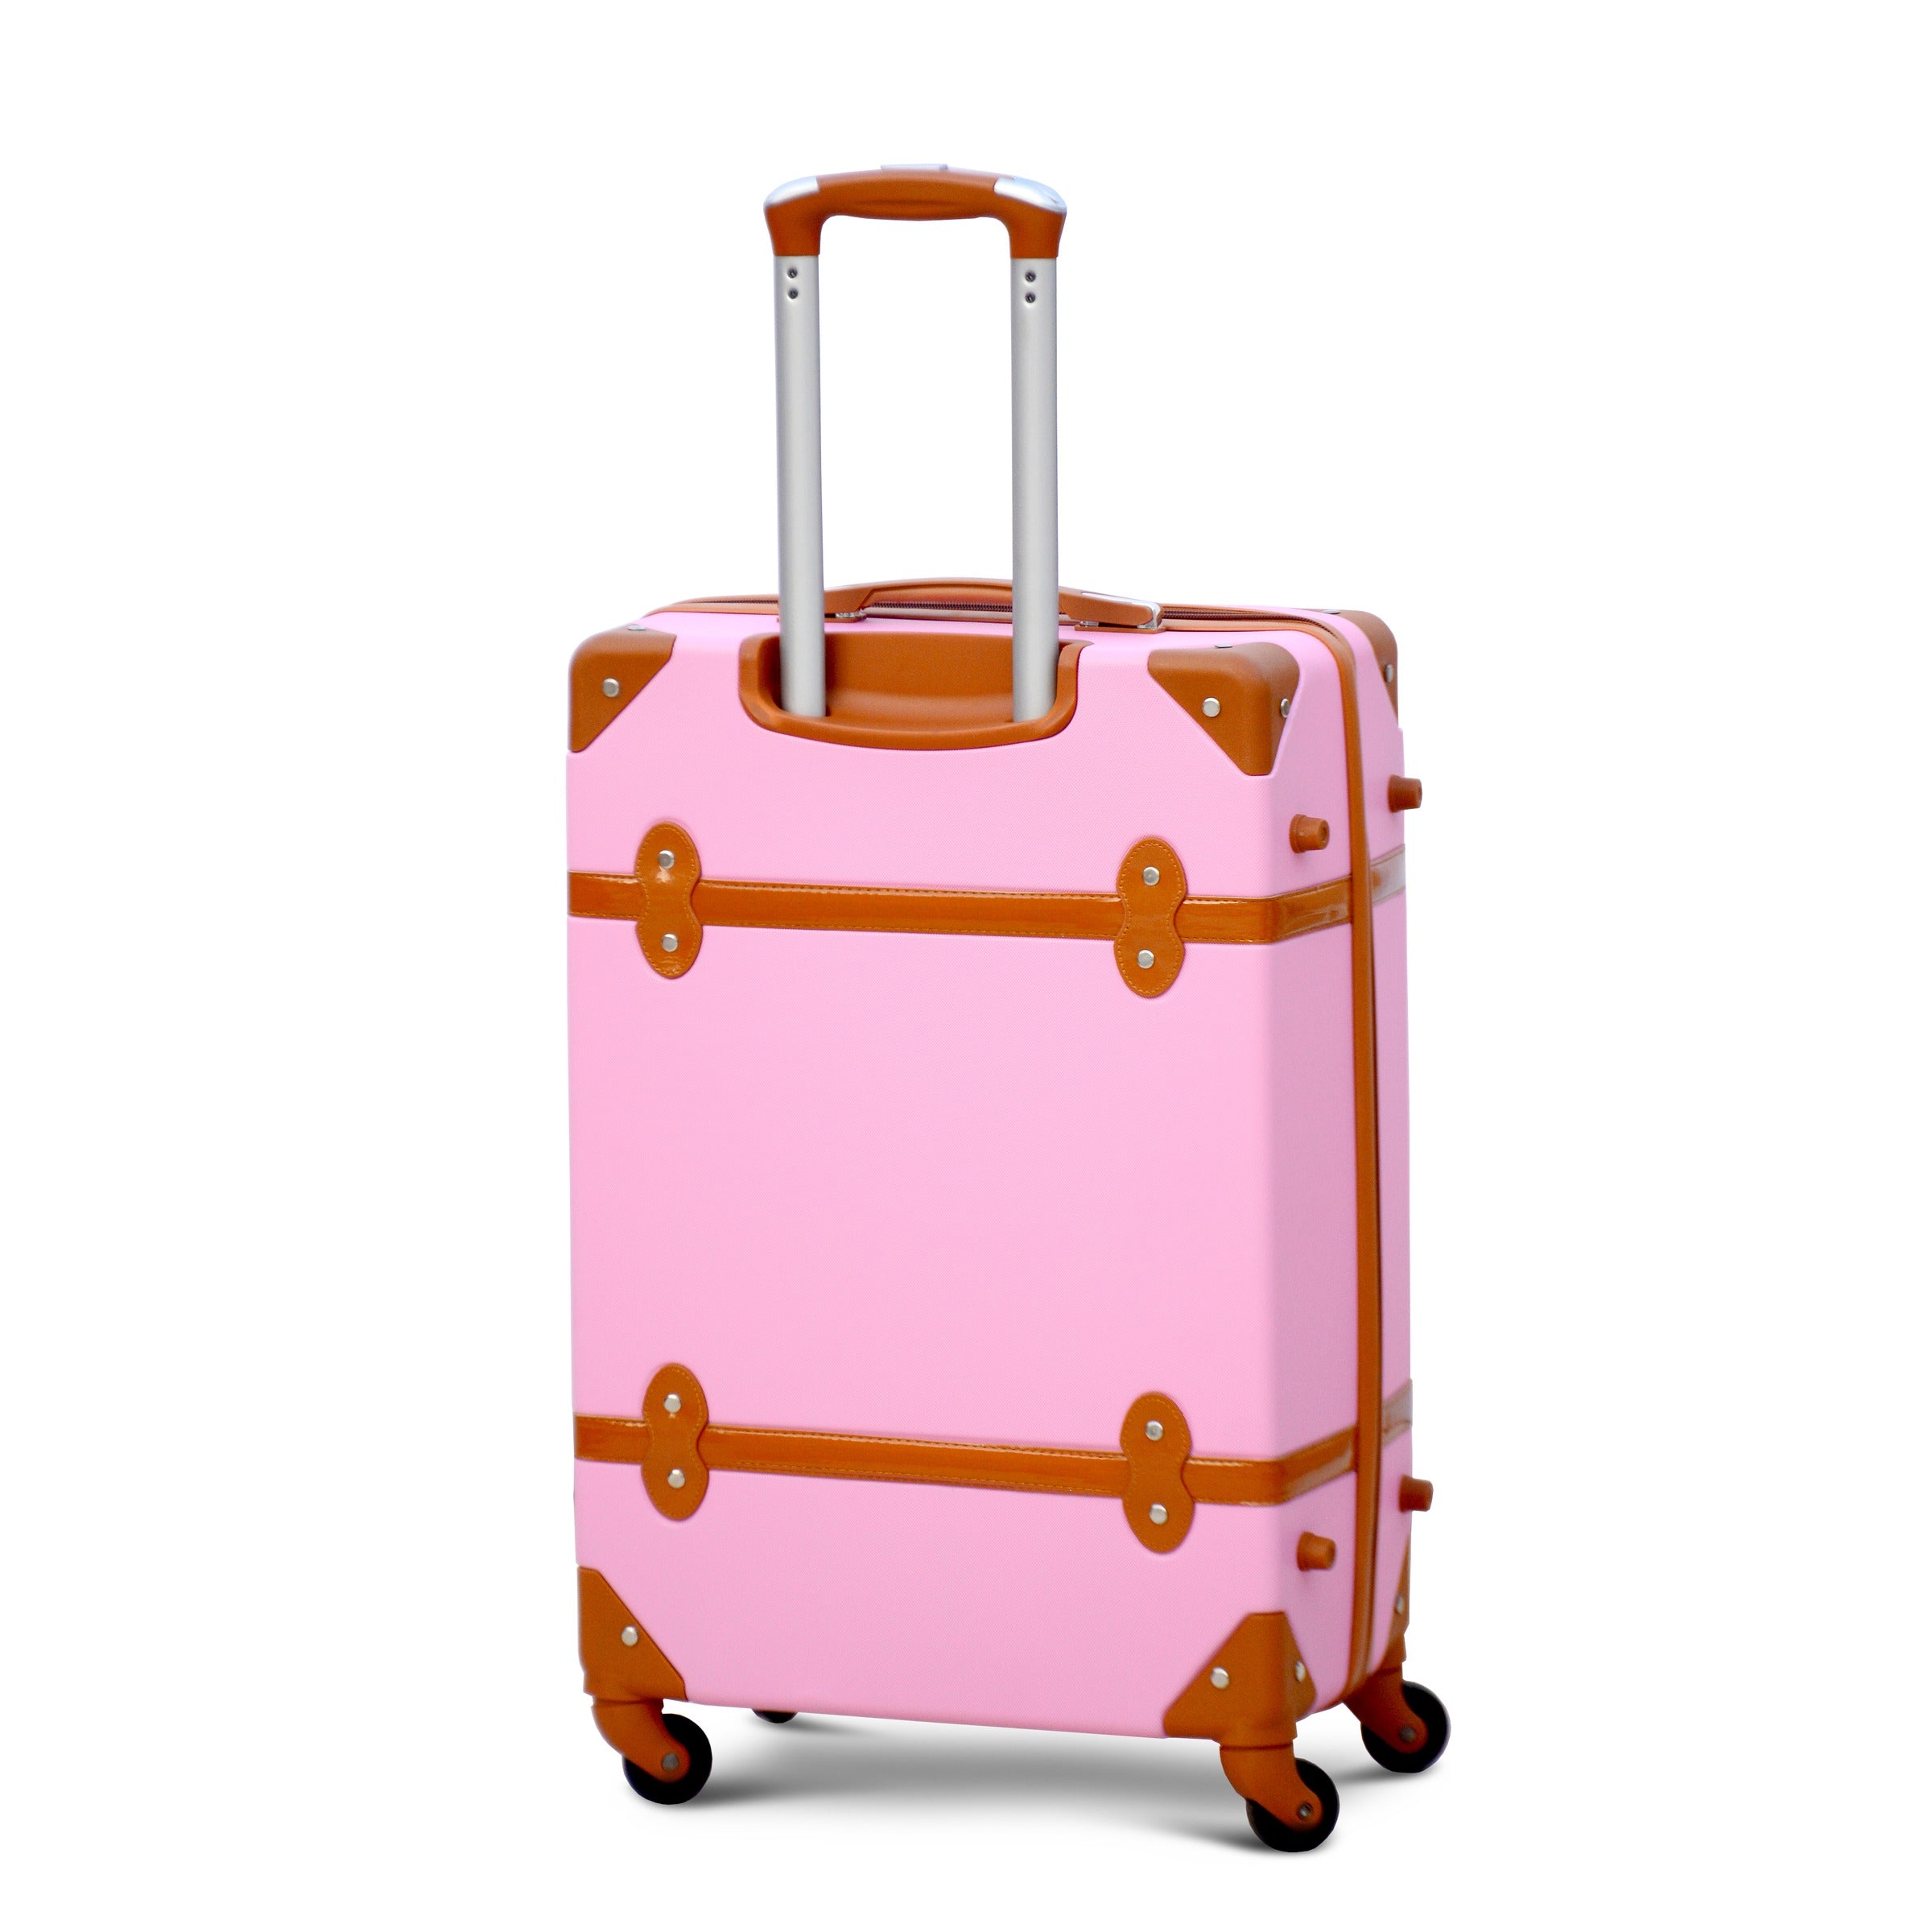 24" Corner Guard Pink and Brown Lightweight ABS Luggage Bag With Spinner Wheel